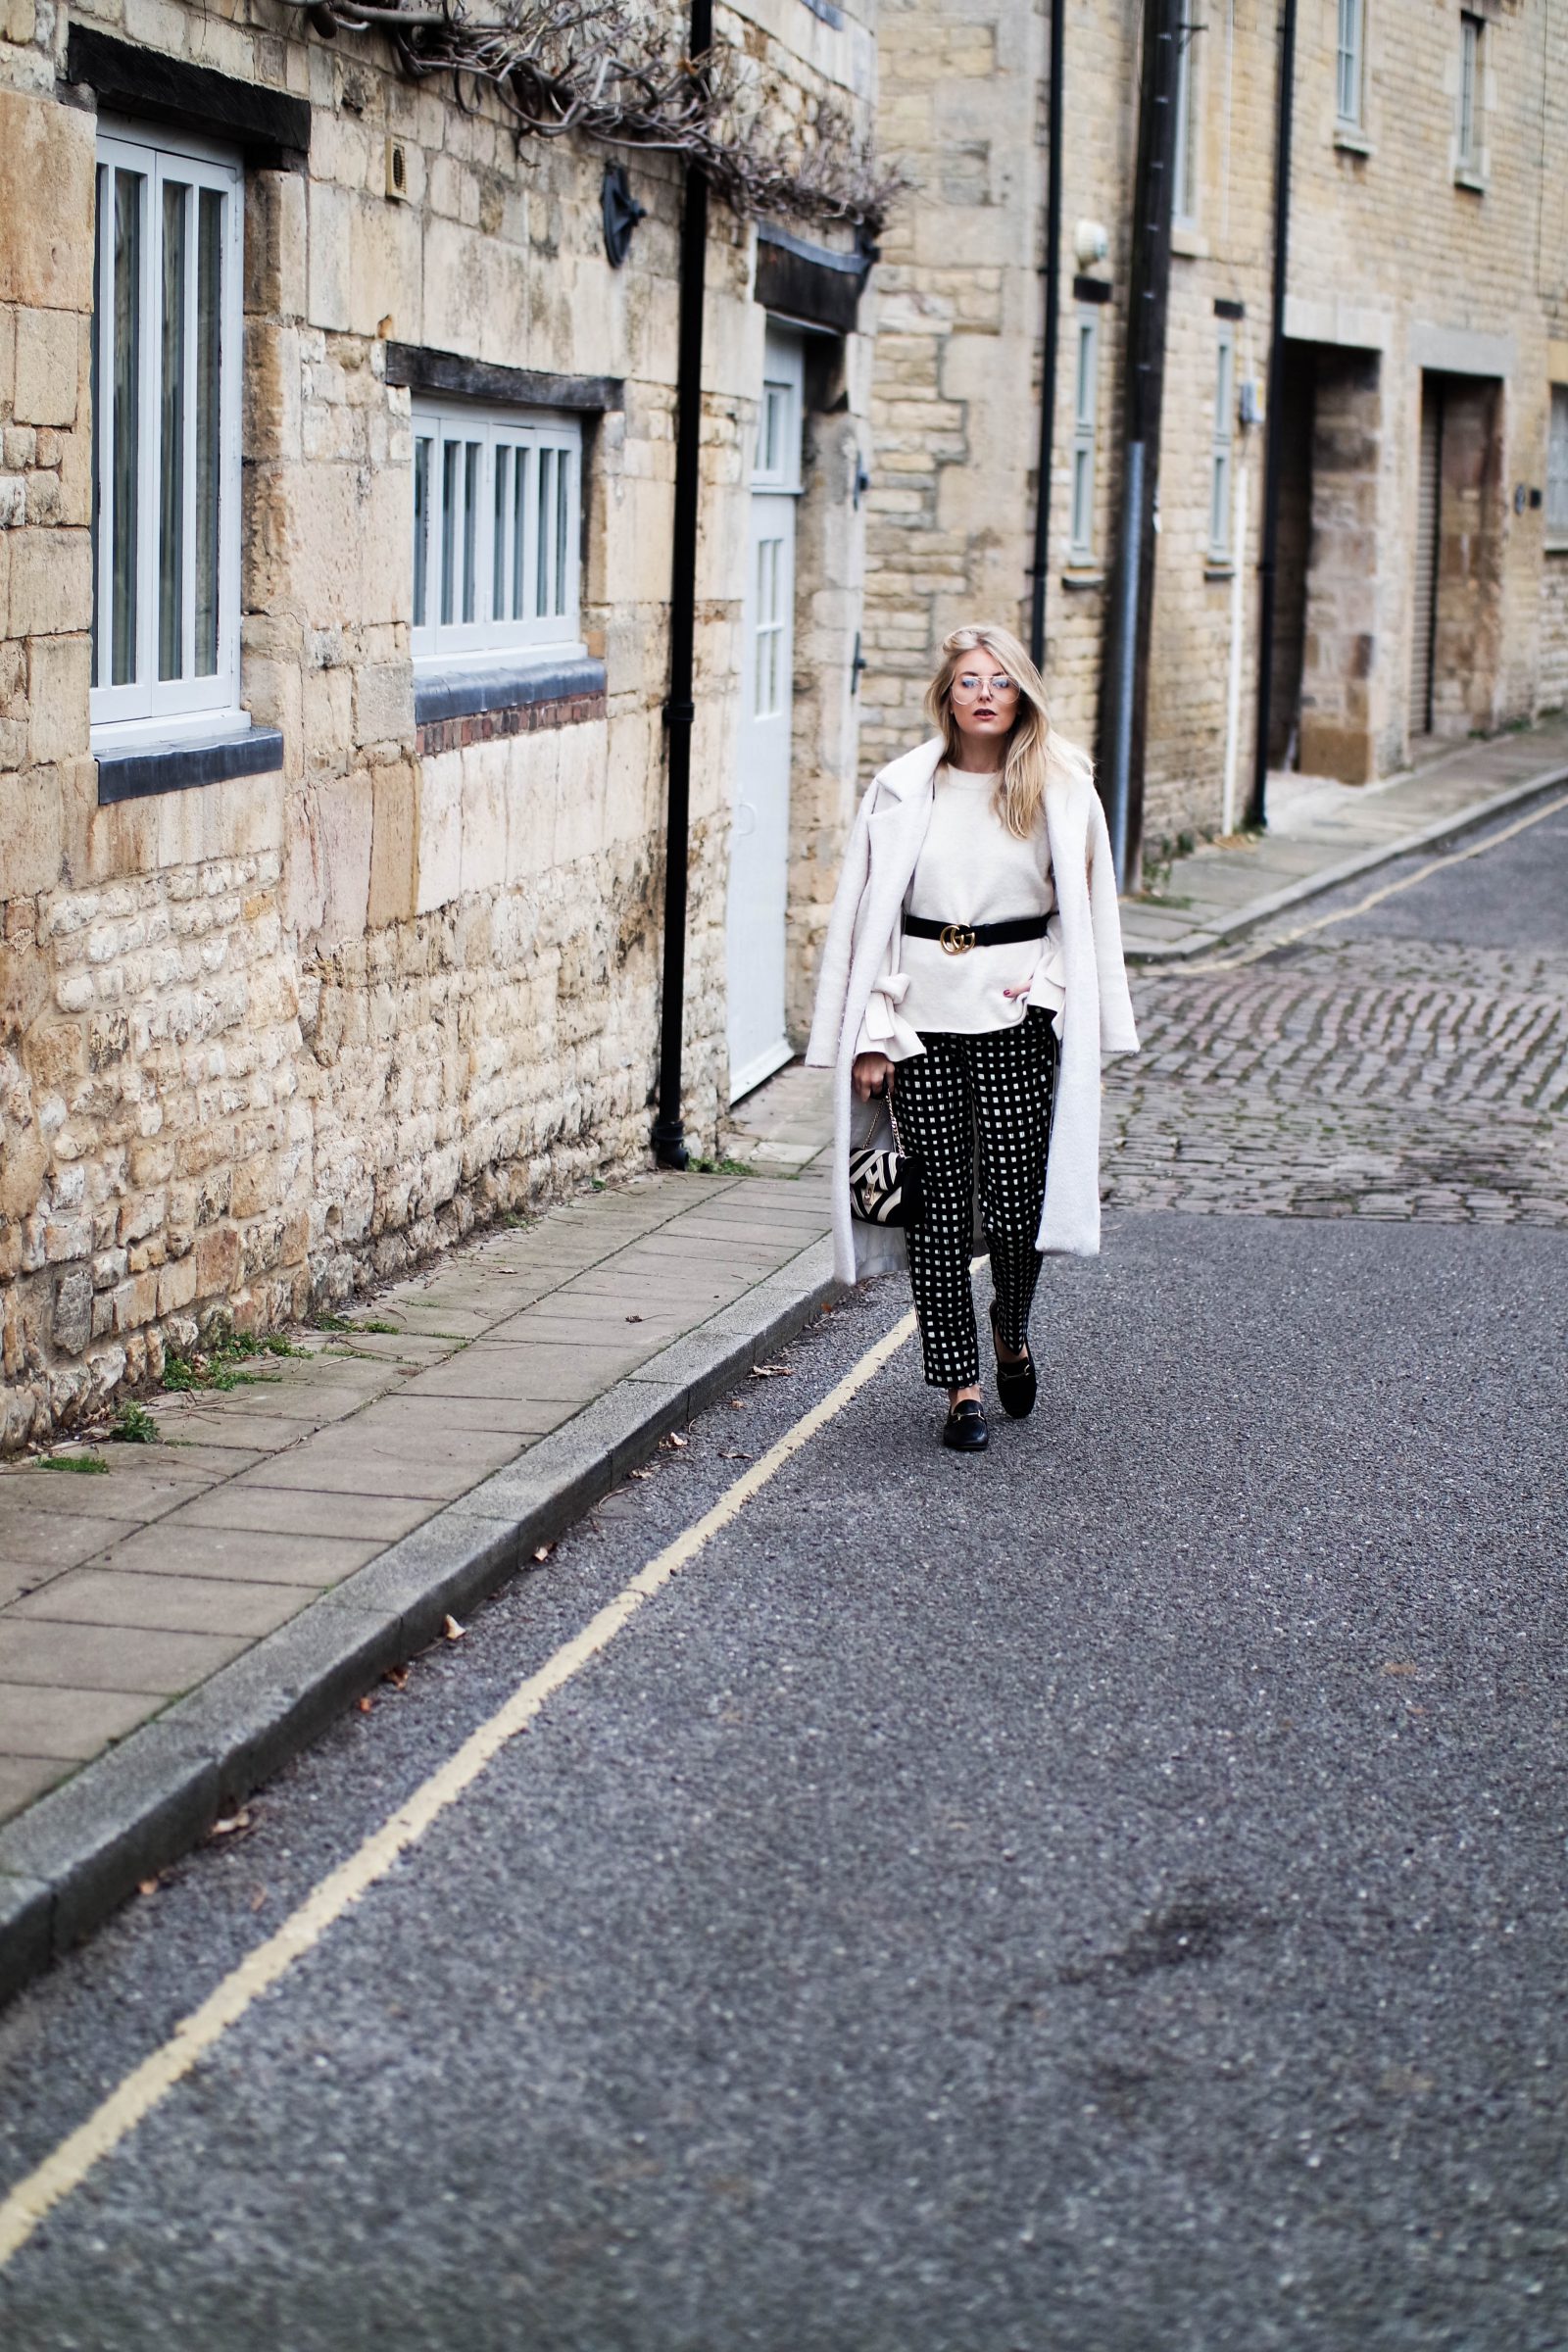 Printed Trousers Trying Something New - Blogger Street Style